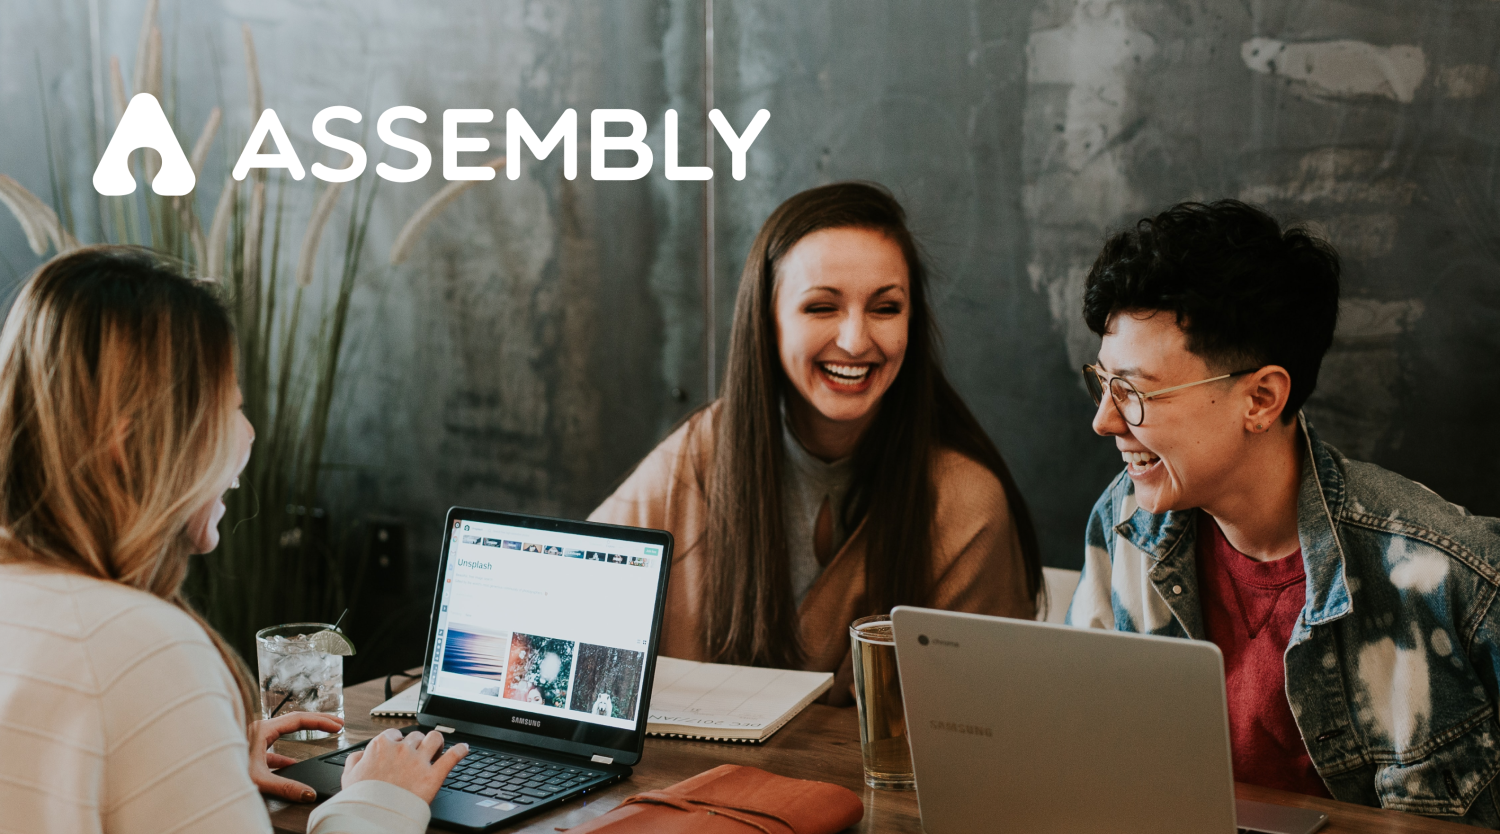 People smiling in front of computers overlay of Assembly logo